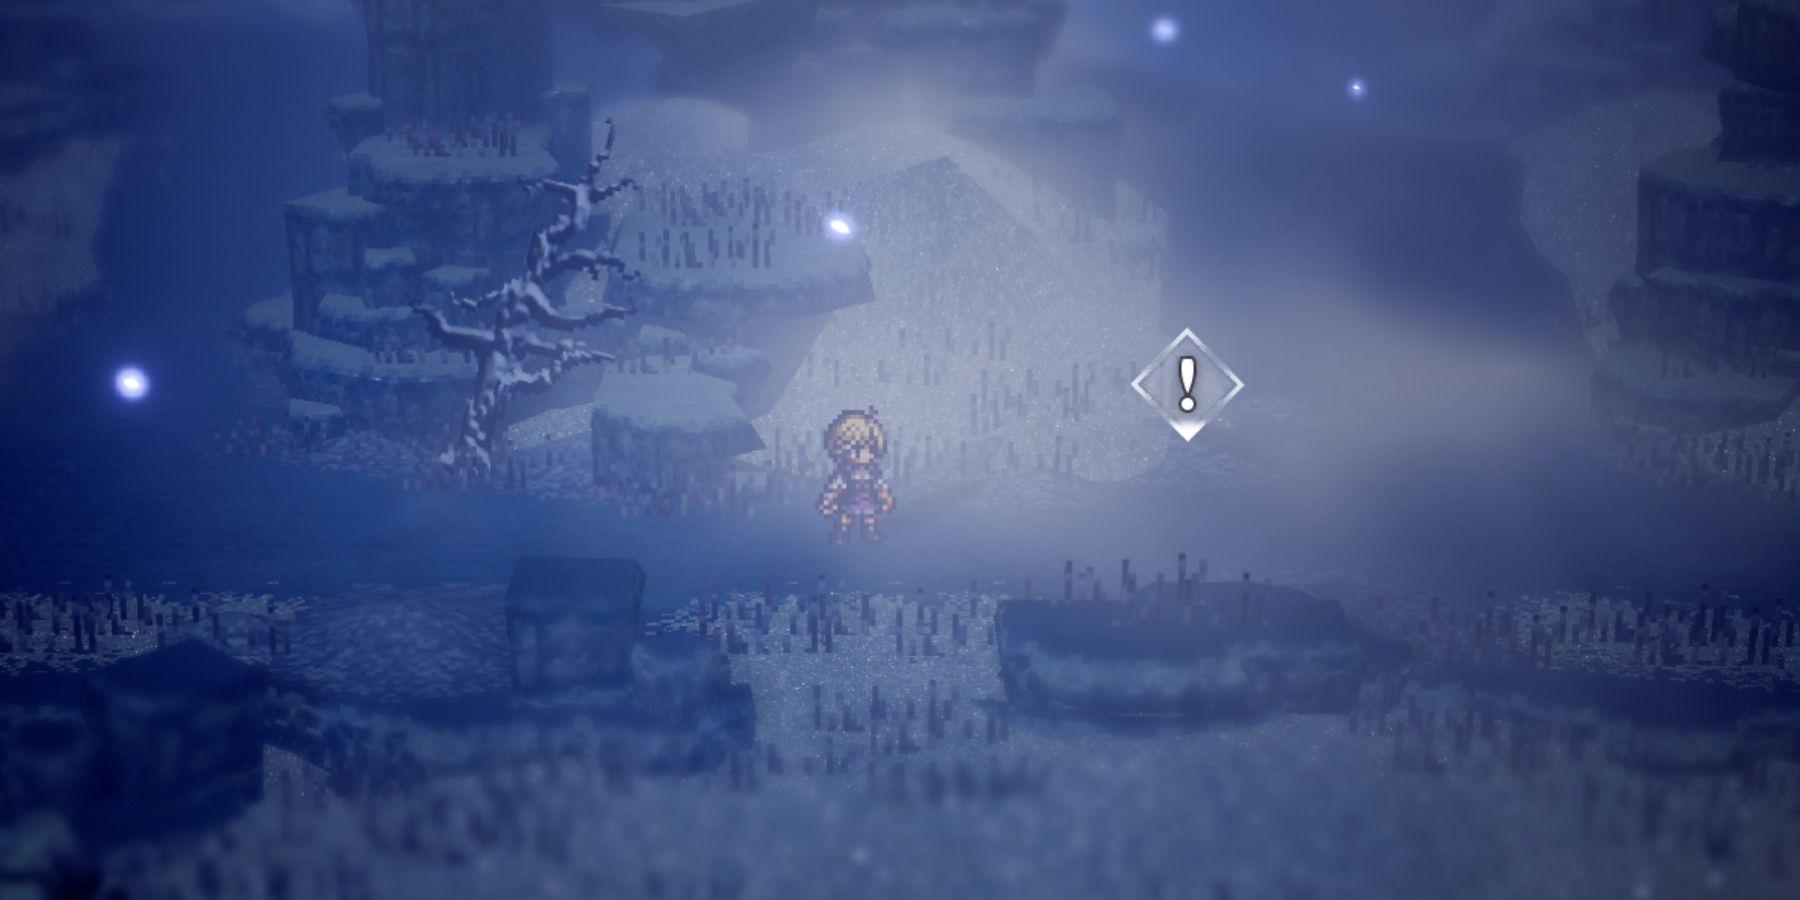 Octopath Traveler: Champions of the Continent Explained